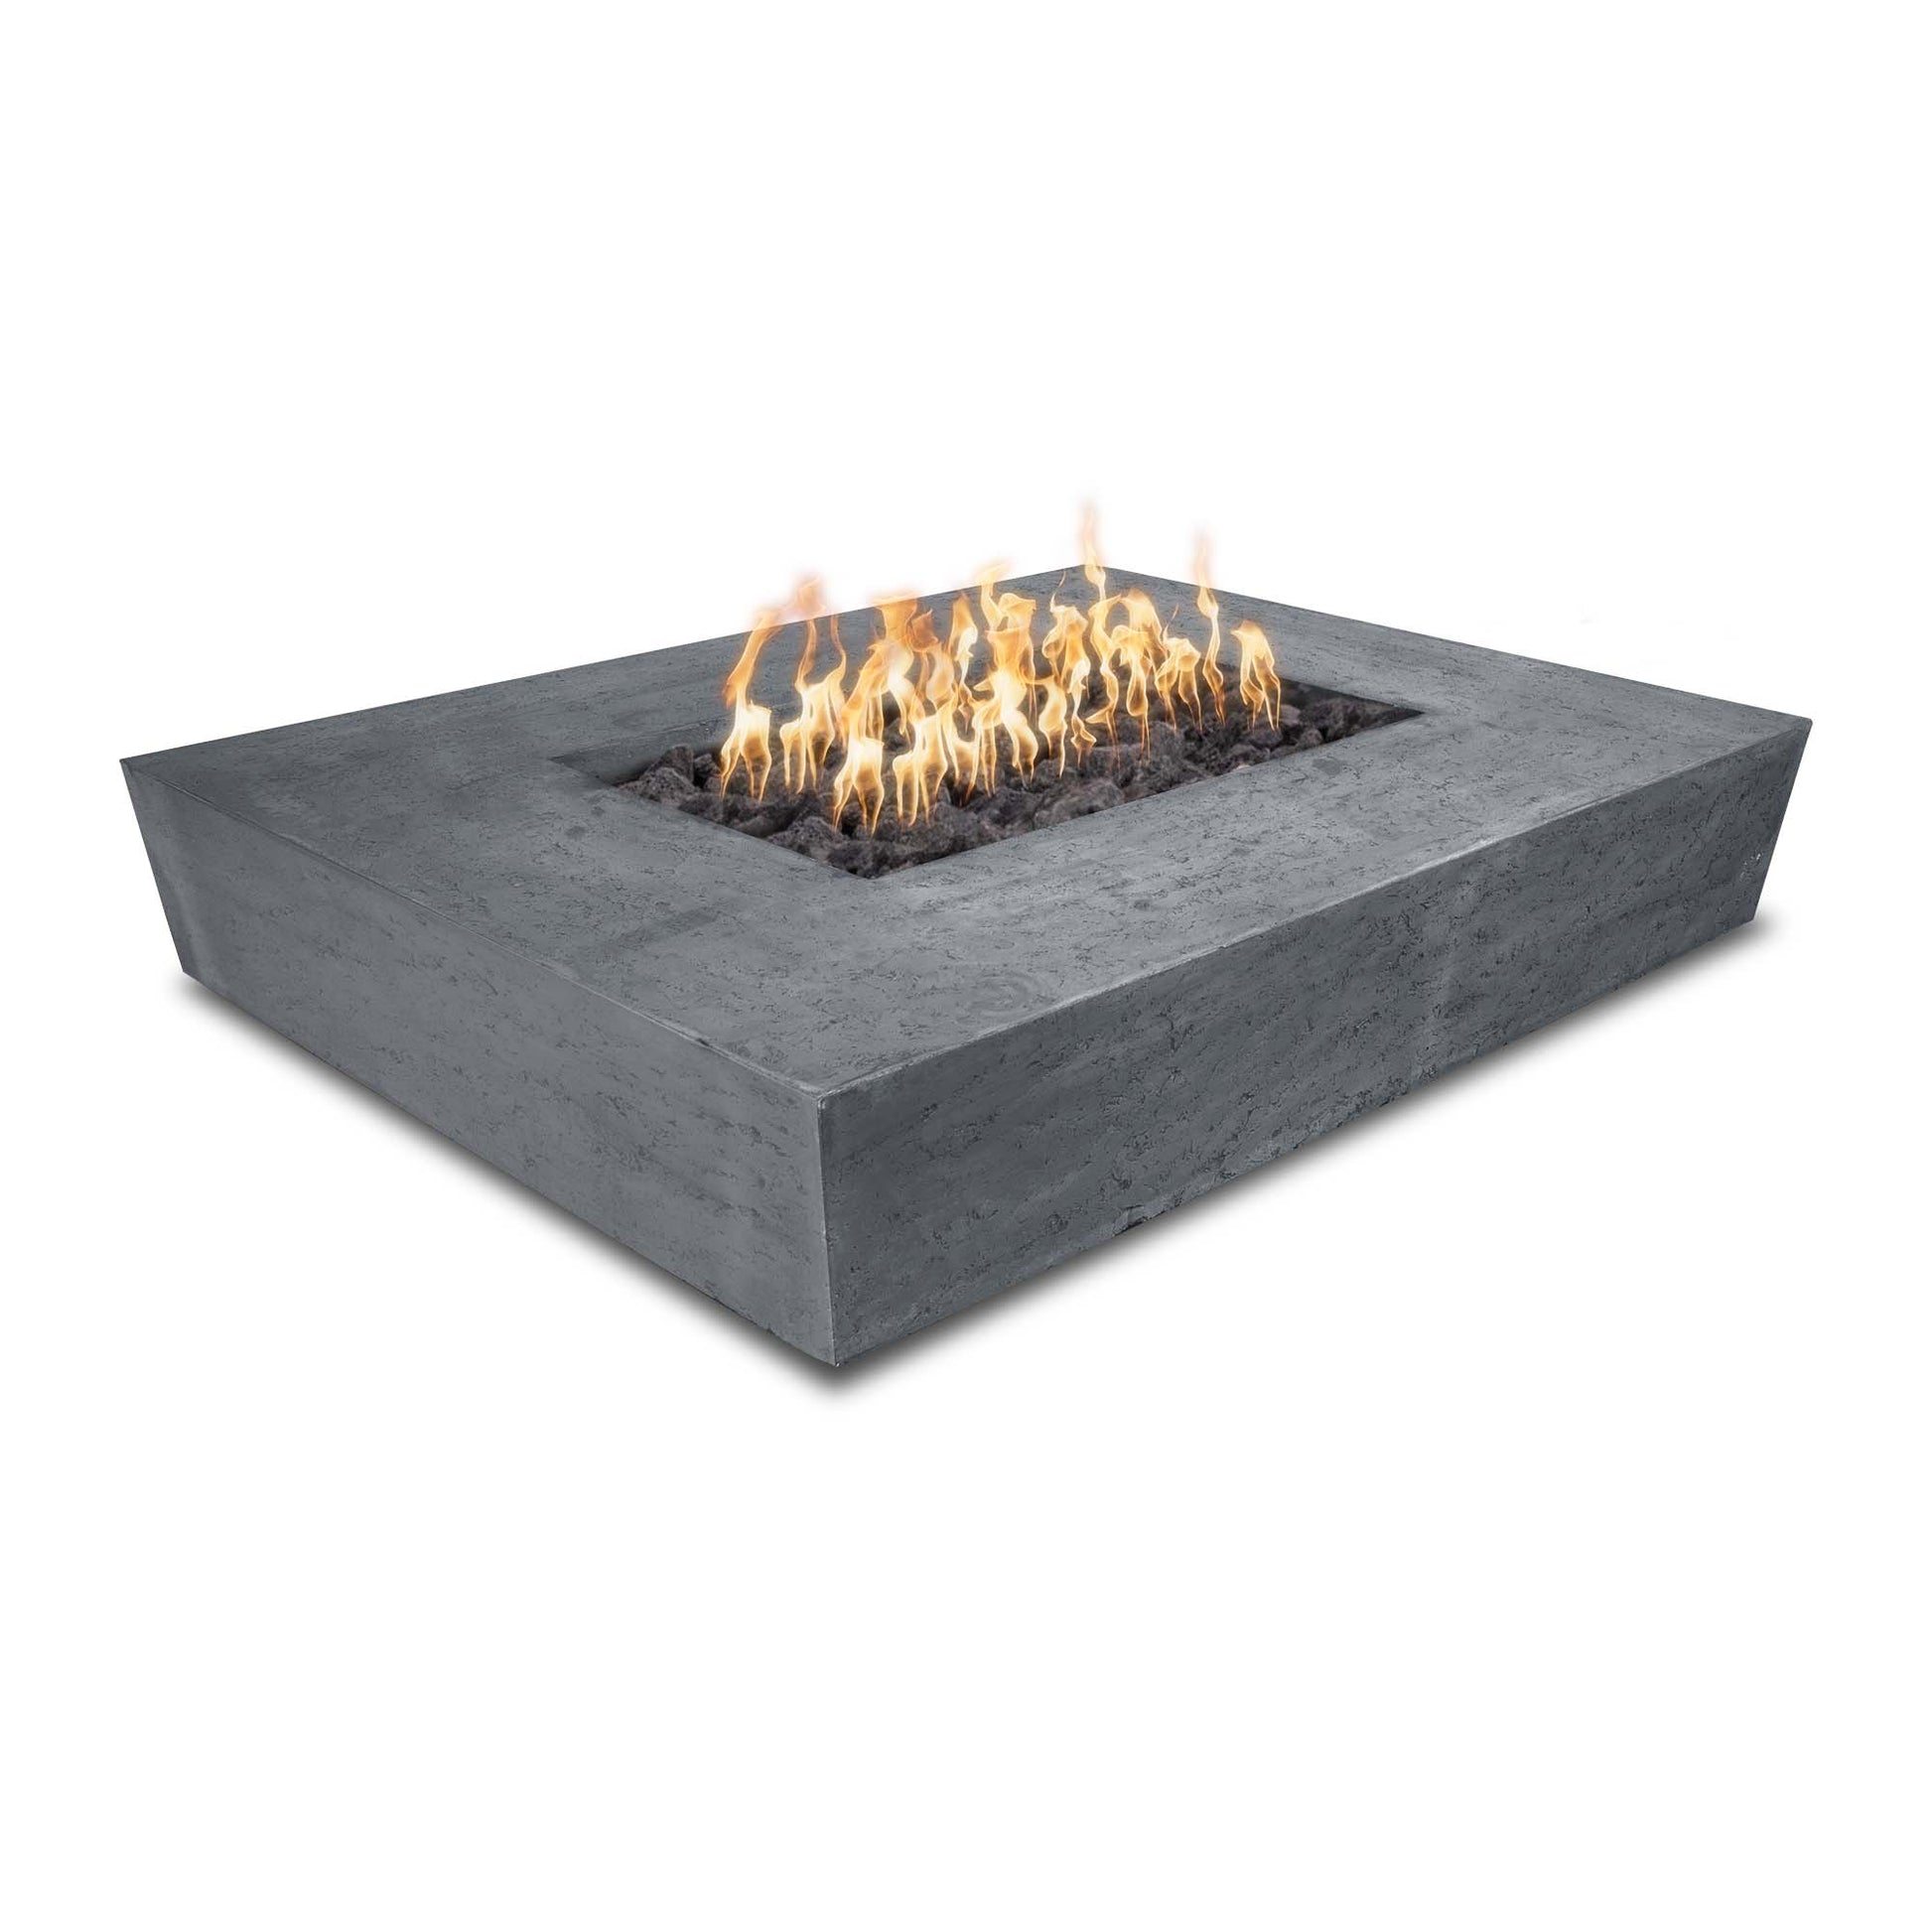 The Outdoor Plus Rectangular Heiko 58" Natural Gray GFRC Concrete Liquid Propane Fire Pit with Match Lit with Flame Sense Ignition